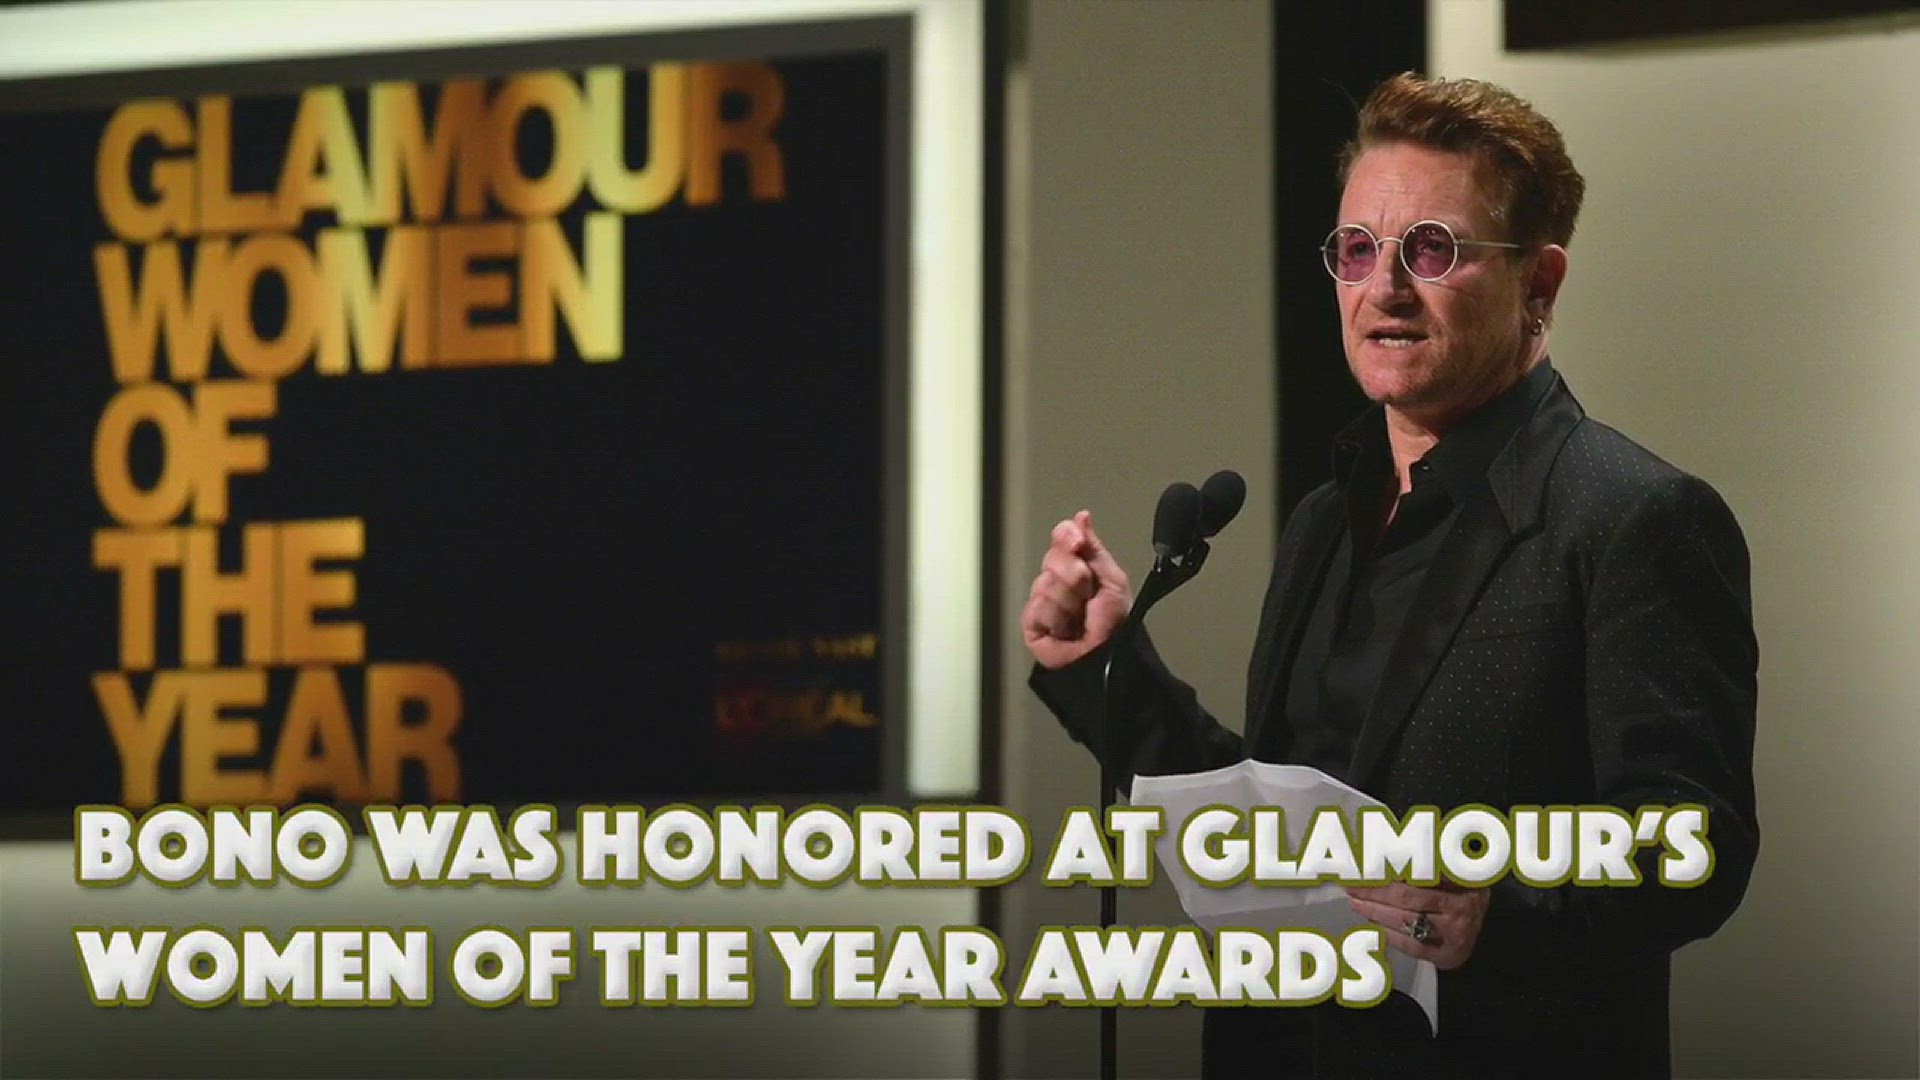 Bono was honored at Glamour's "Women of the Year" Awards. WFAA.com